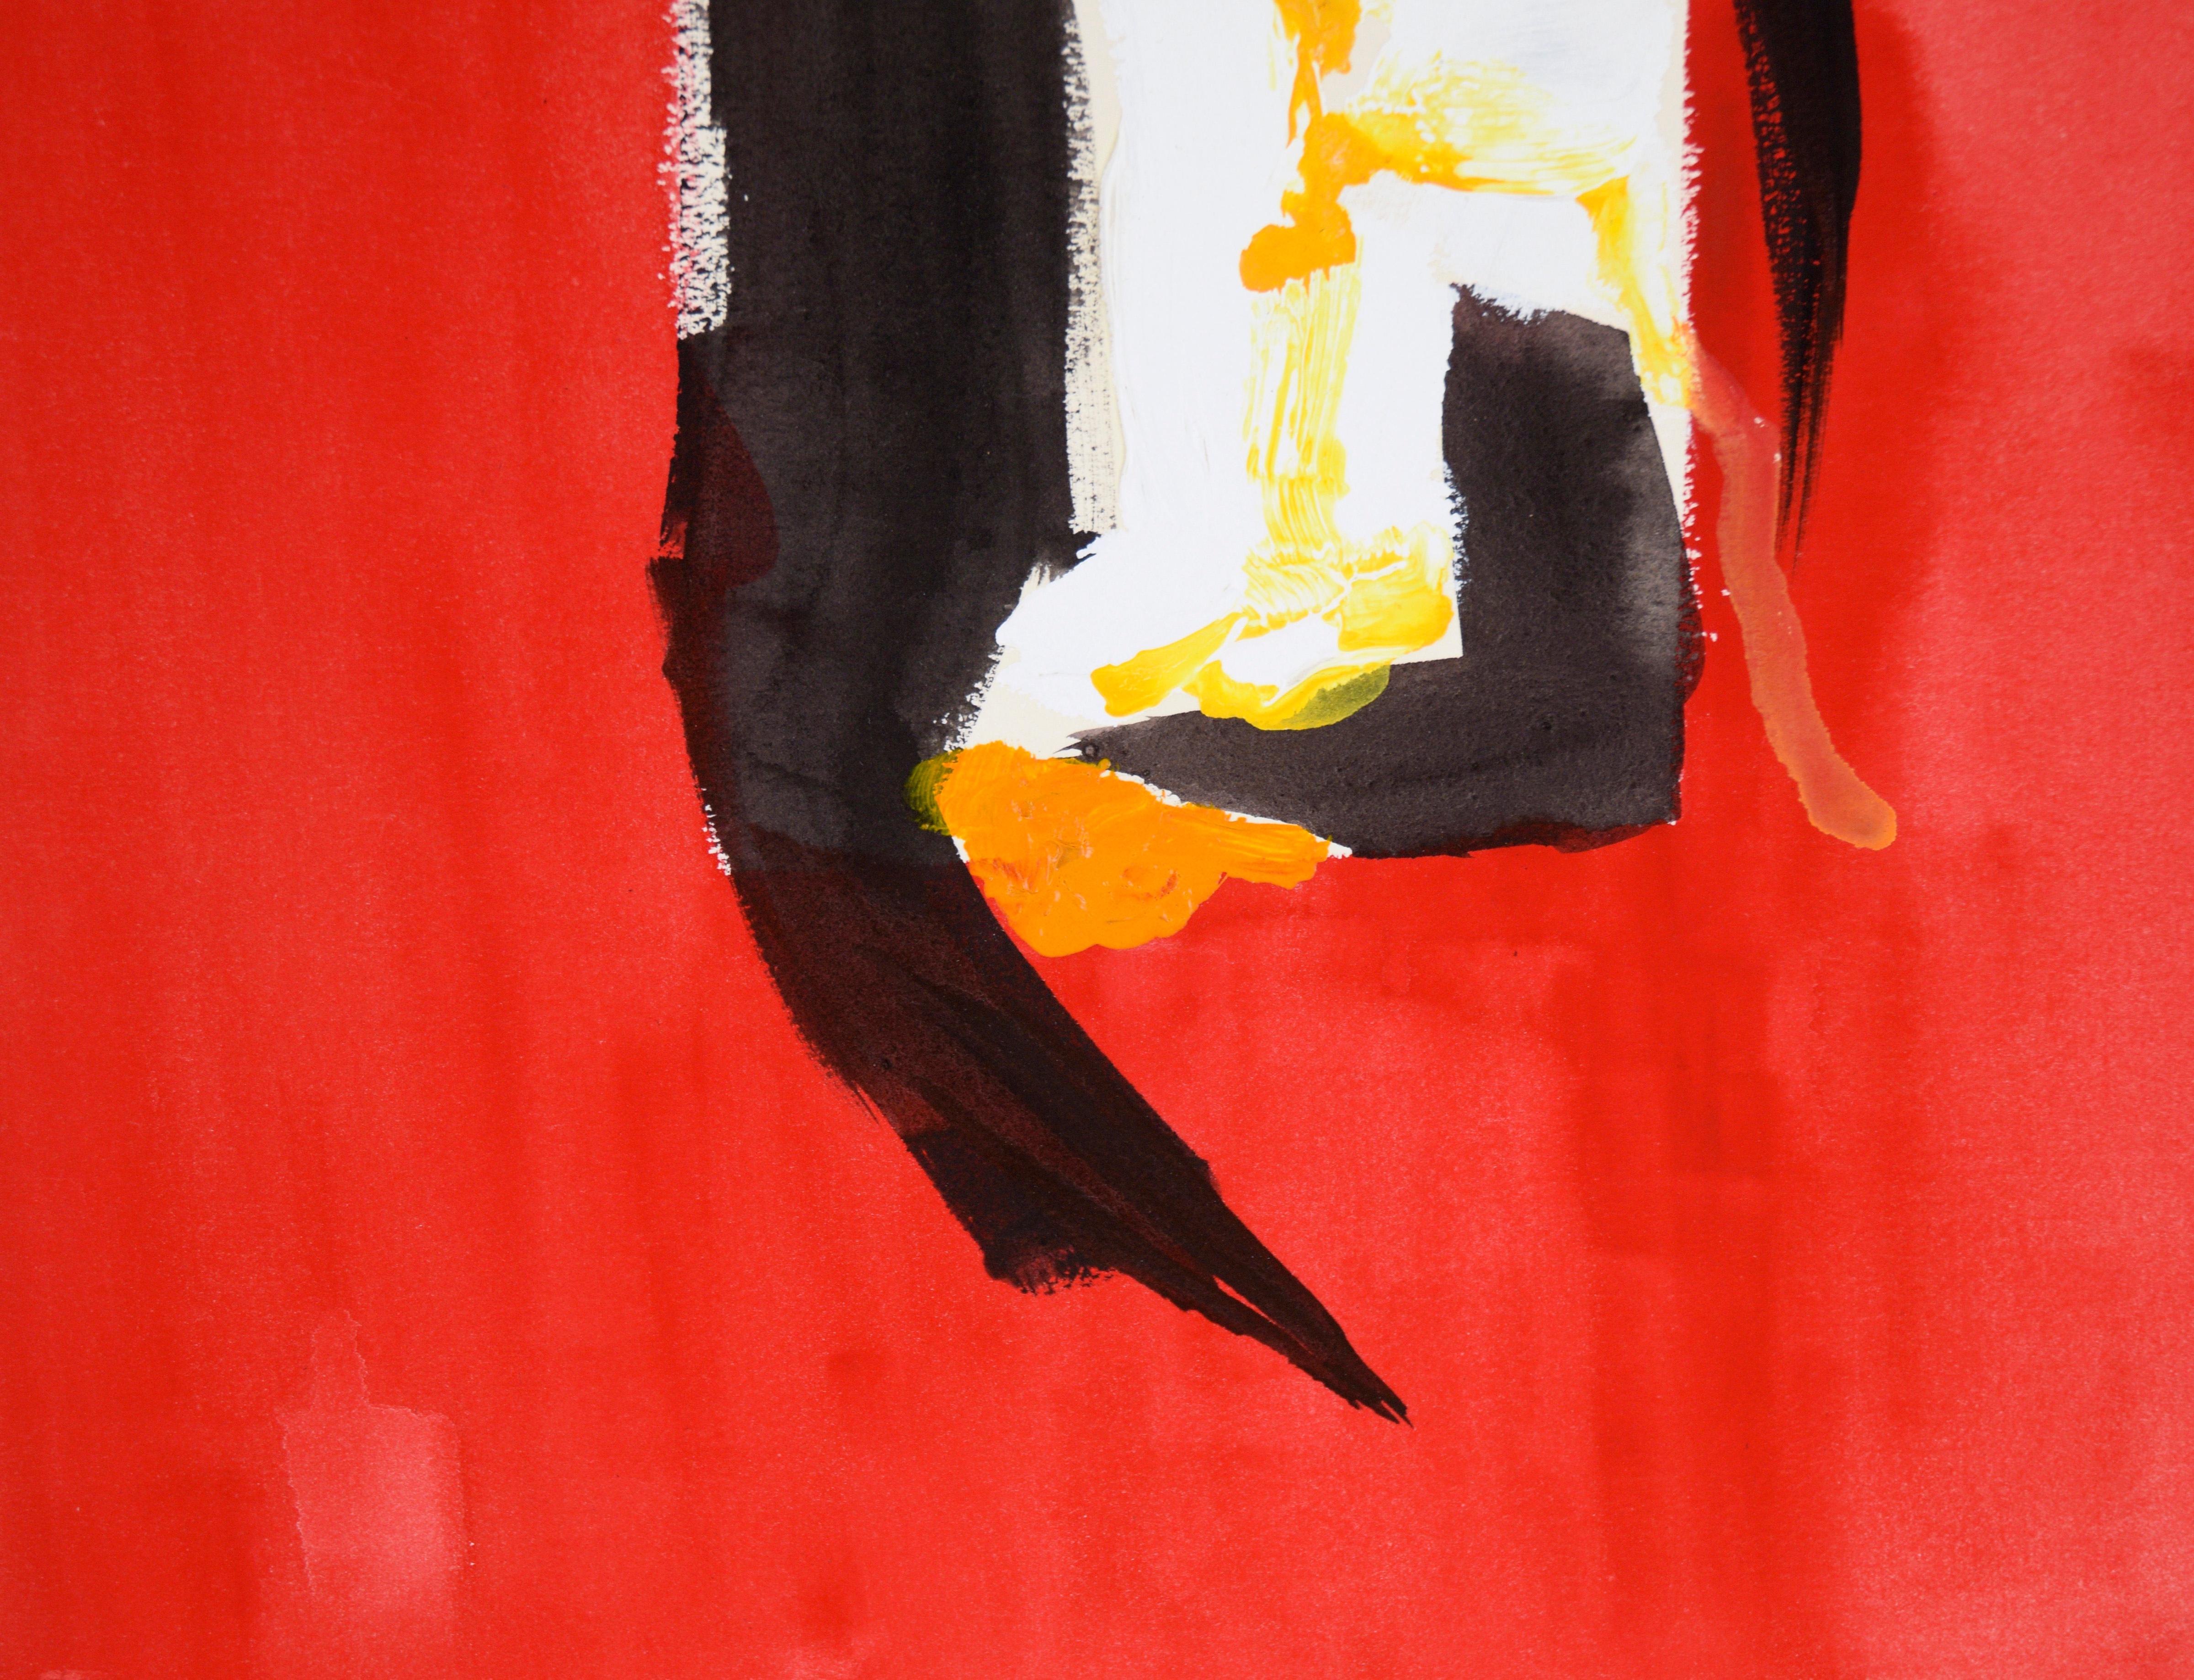 Red with Black, White and Orange - Expressionist Composition in Acrylic on Paper

A bright abstract painting by California-based artist, Ricardo de Silva (American/Brazil, 20th C). A mostly red composition is punctuated by black, white, yellow, and